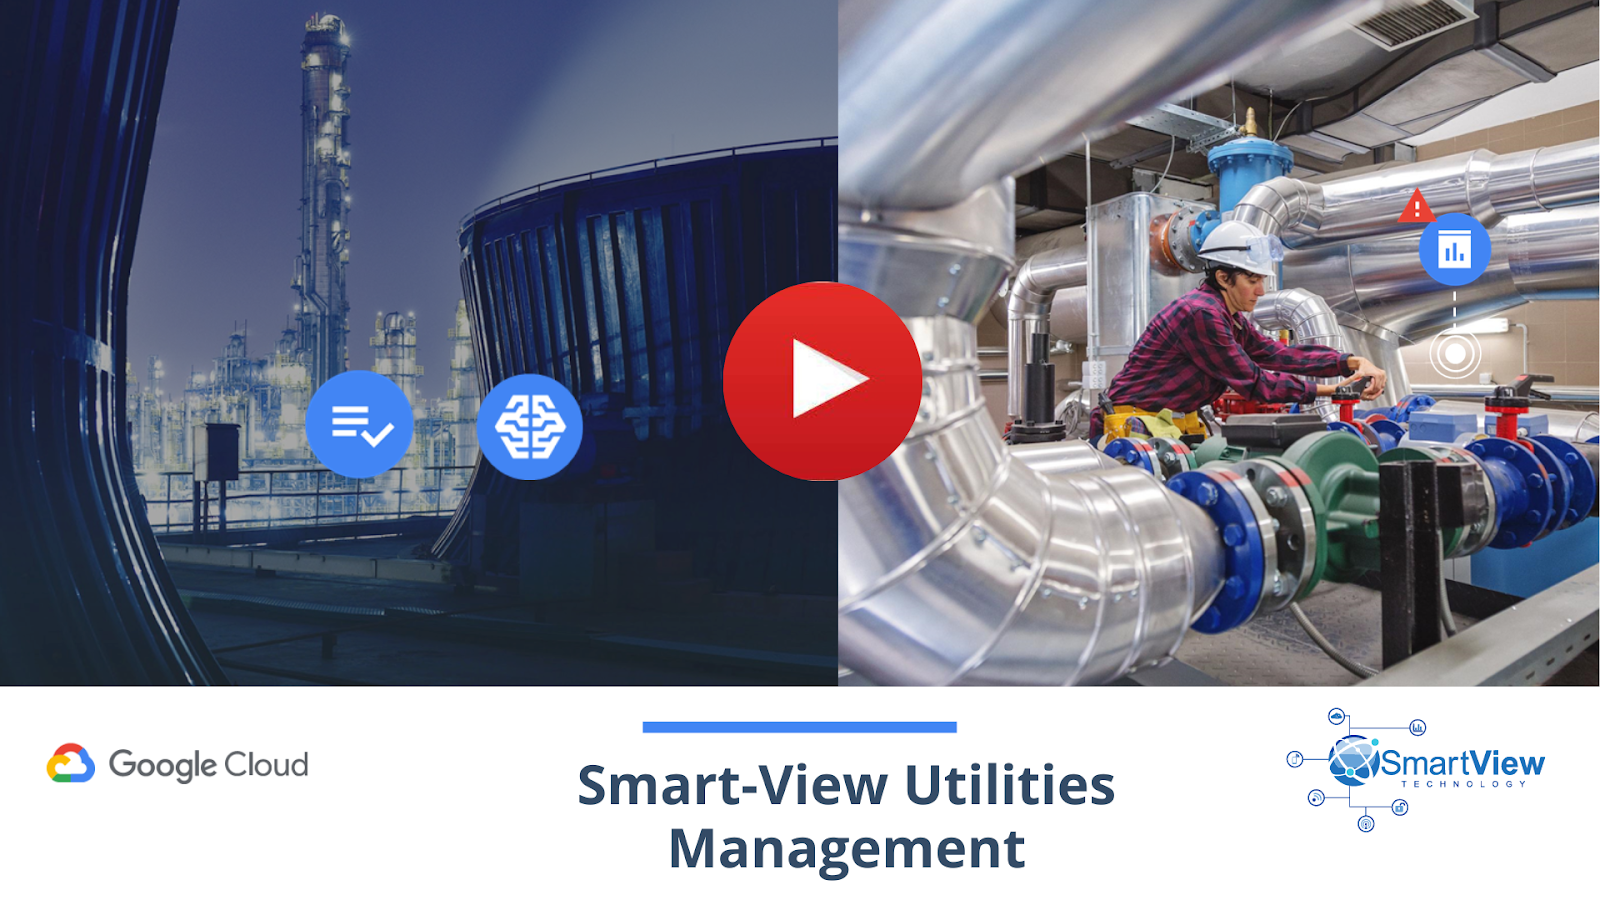 Smart-View Technology provides enterprise-grade smart metering solutions. Our advanced software allows for real-time monitoring and management of consumption, making it easier for businesses to control costs and improve efficiency.